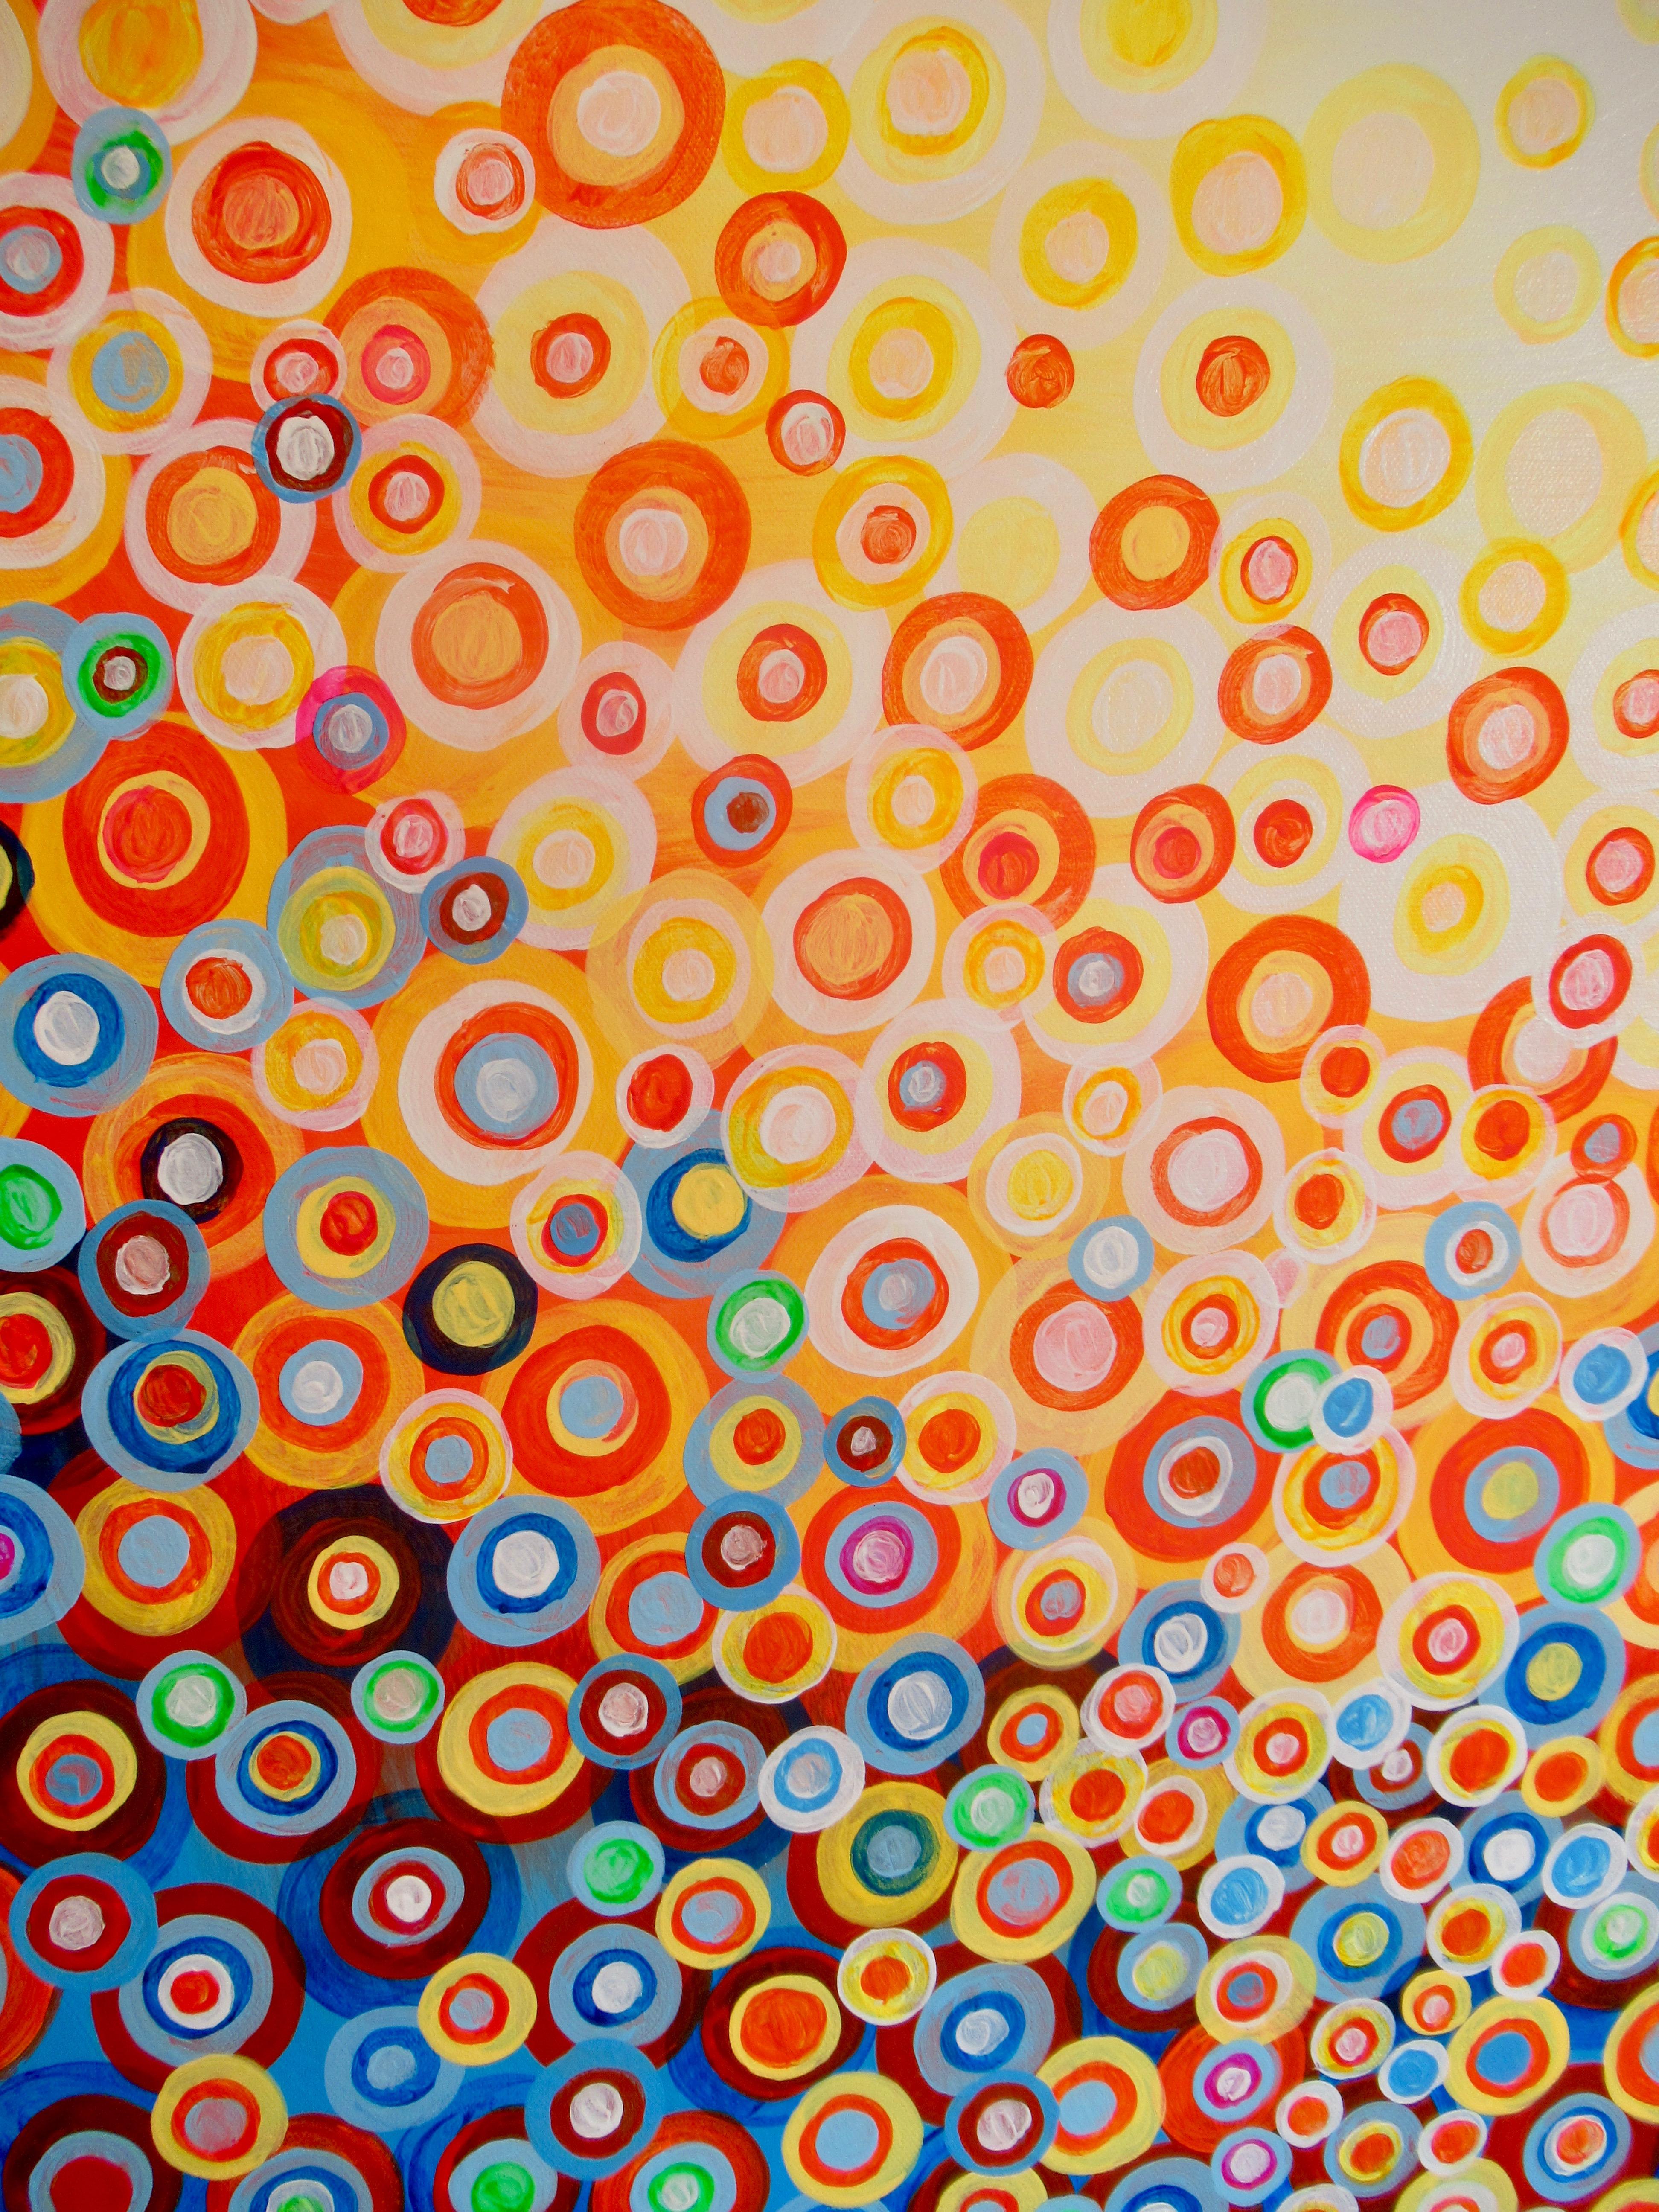 <p>Artist Comments<br />Radiant yellow, orange, red, blue, and green orbs fall from the sky silhouetted by the sun. Reminiscent of a field of spring flowers in the bright morning light. This piece is part of artist Natasha Tayles's signature Circles